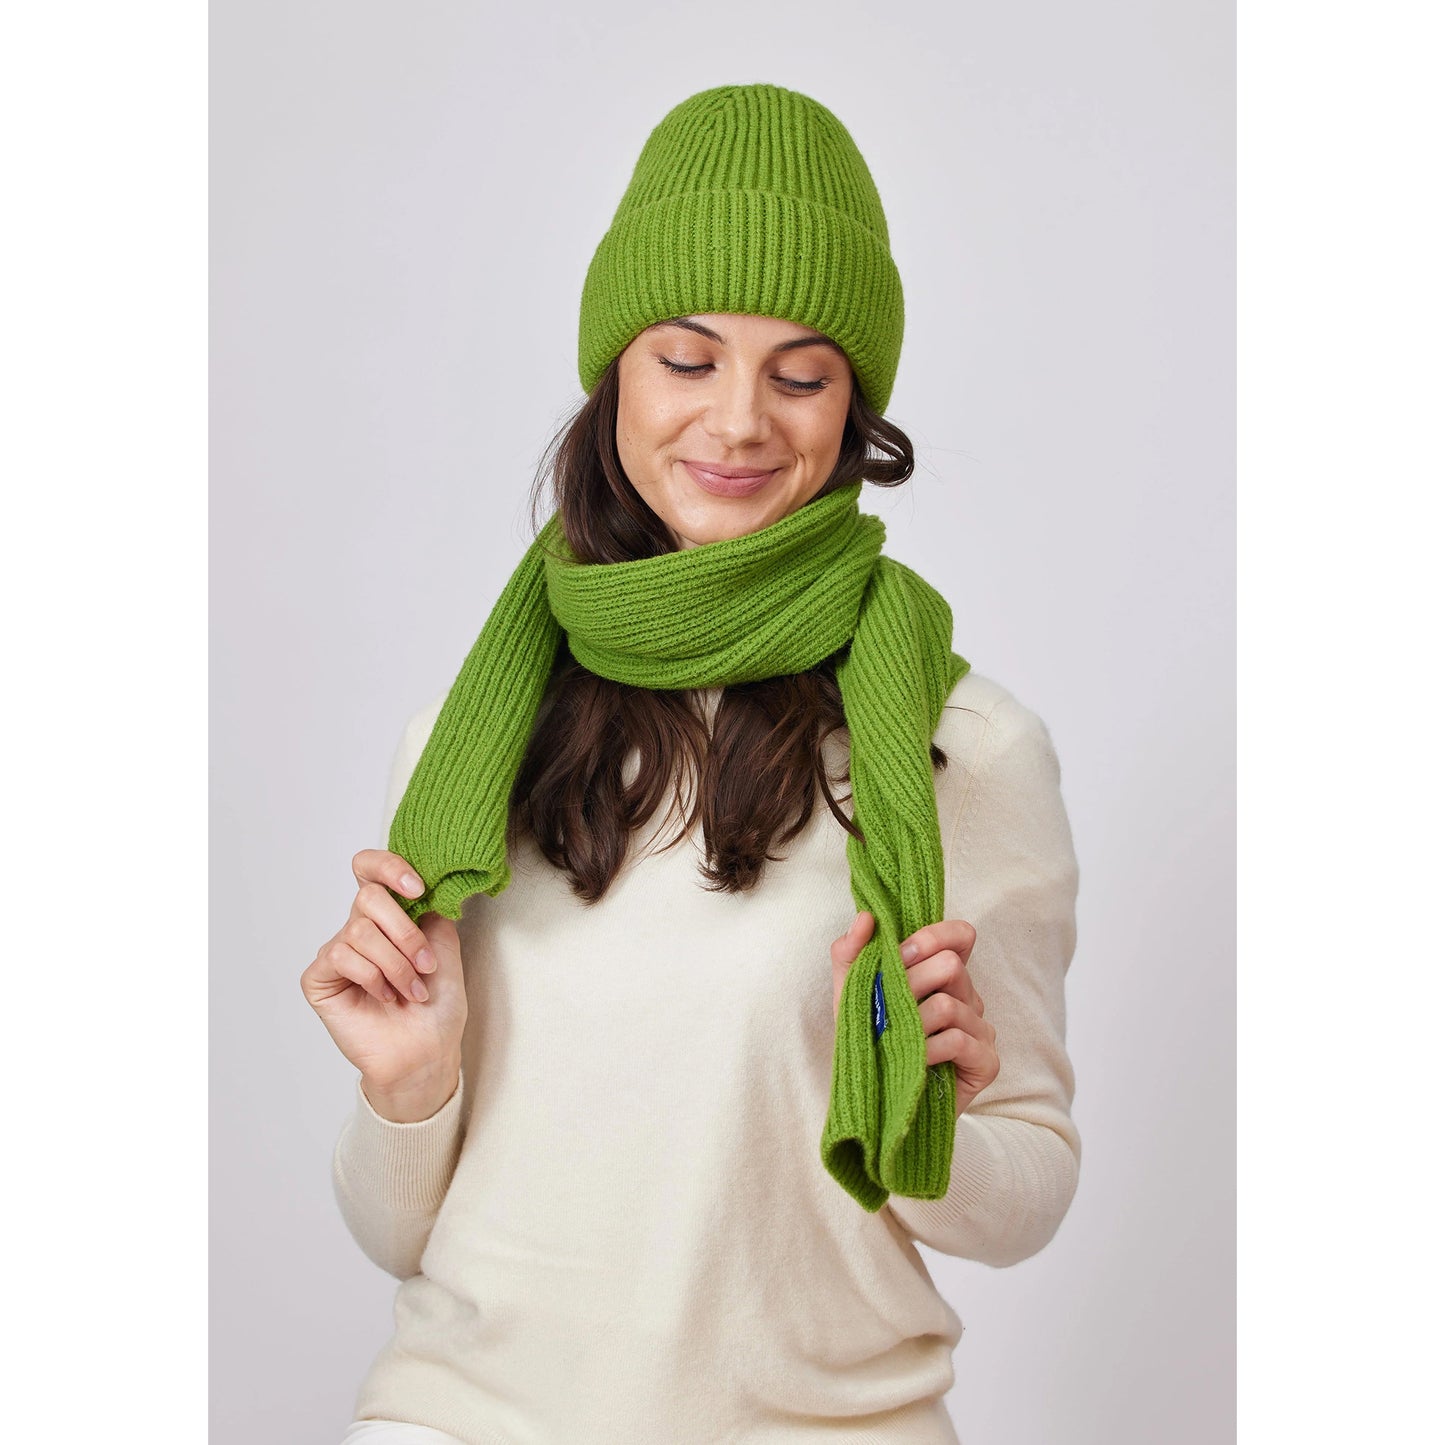 Match Rib Beanie Hat (Select Color)